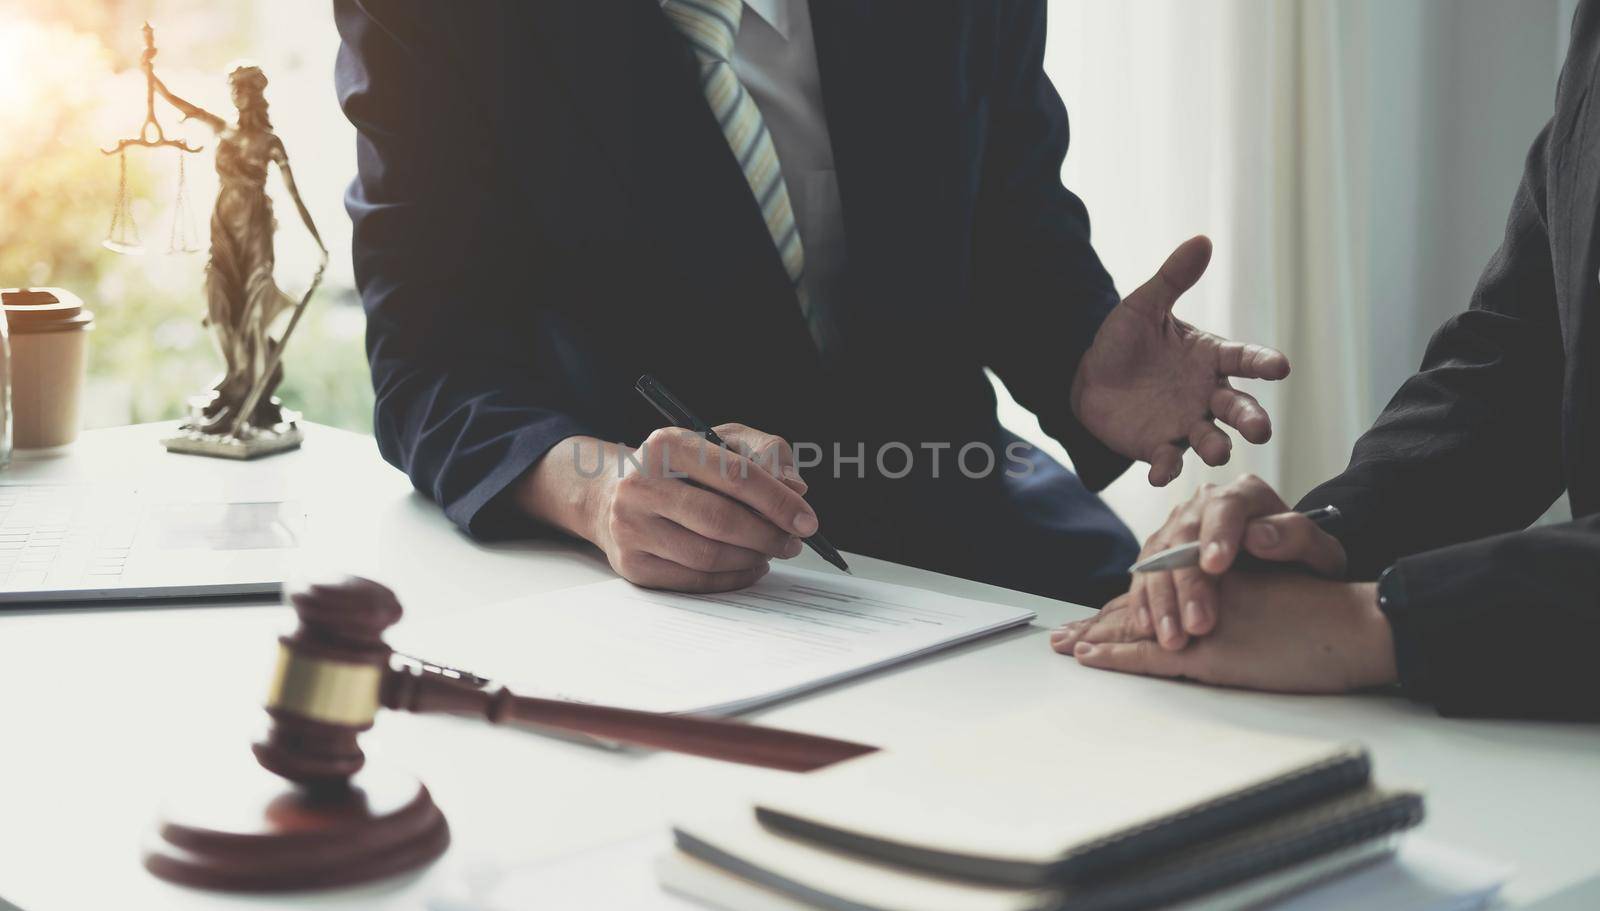 Consultation and conference of Male lawyers and professional businesswoman working and discussion having at law firm in office. Concepts of law, Judge gavel with scales of justice..